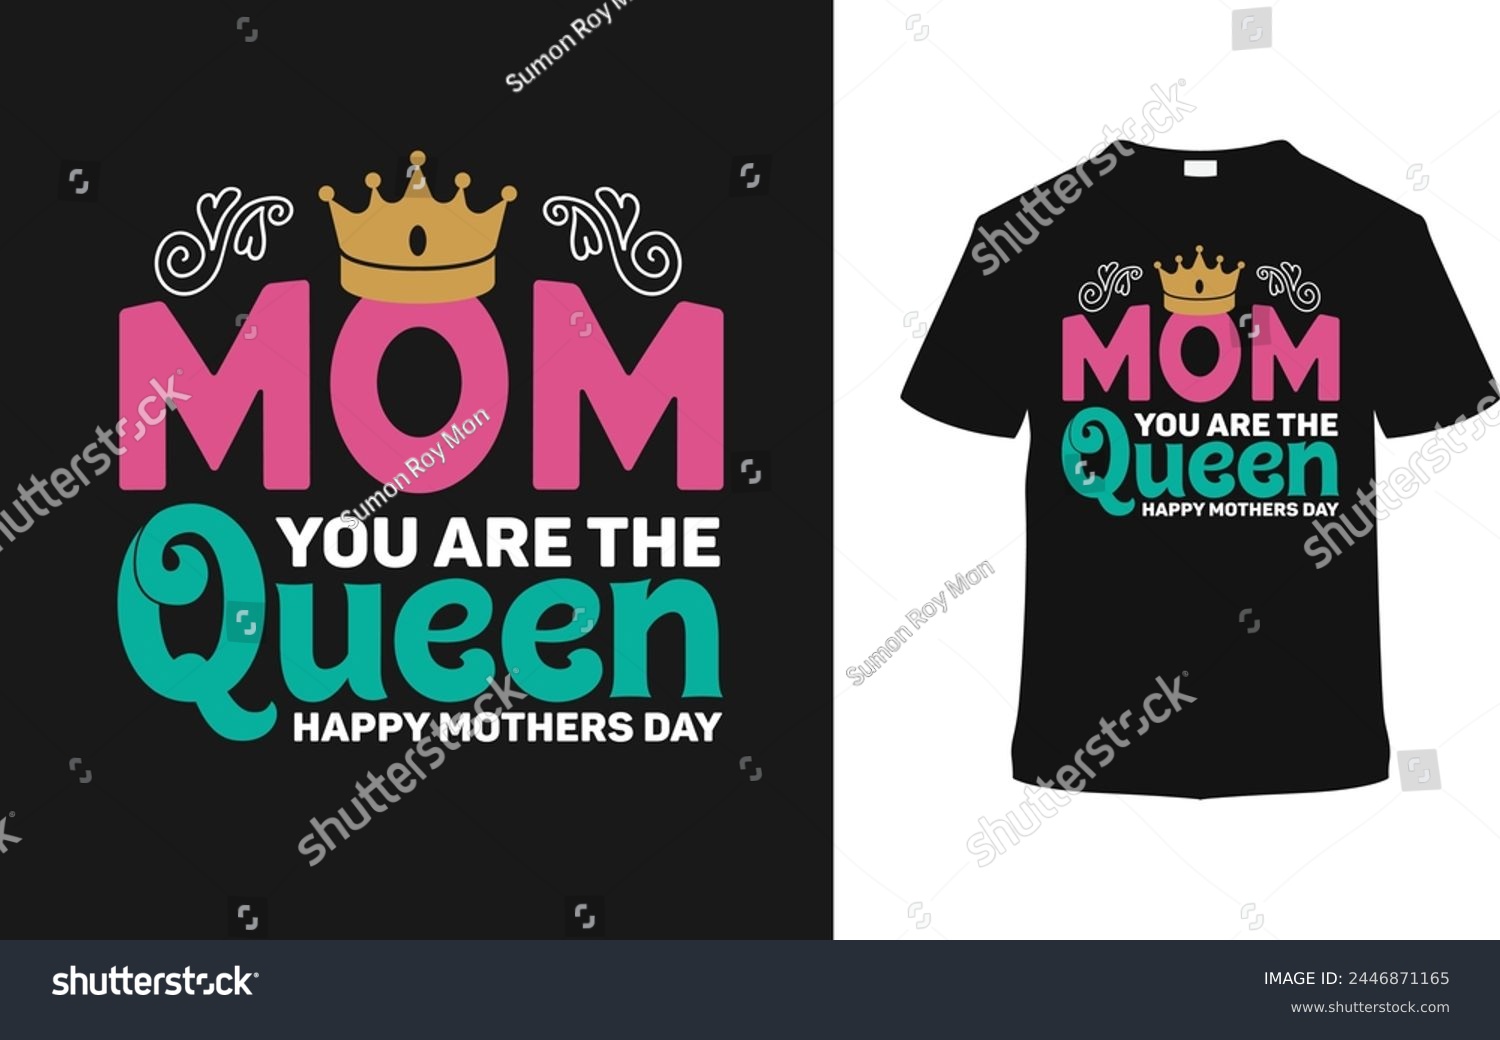 SVG of Mom You Are The Queen Typography T -shirt, vector illustration, graphic template, print on demand, vintage, eps 10, textile fabrics, retro style, element, apparel, mother's day t shirt design, mom tee svg